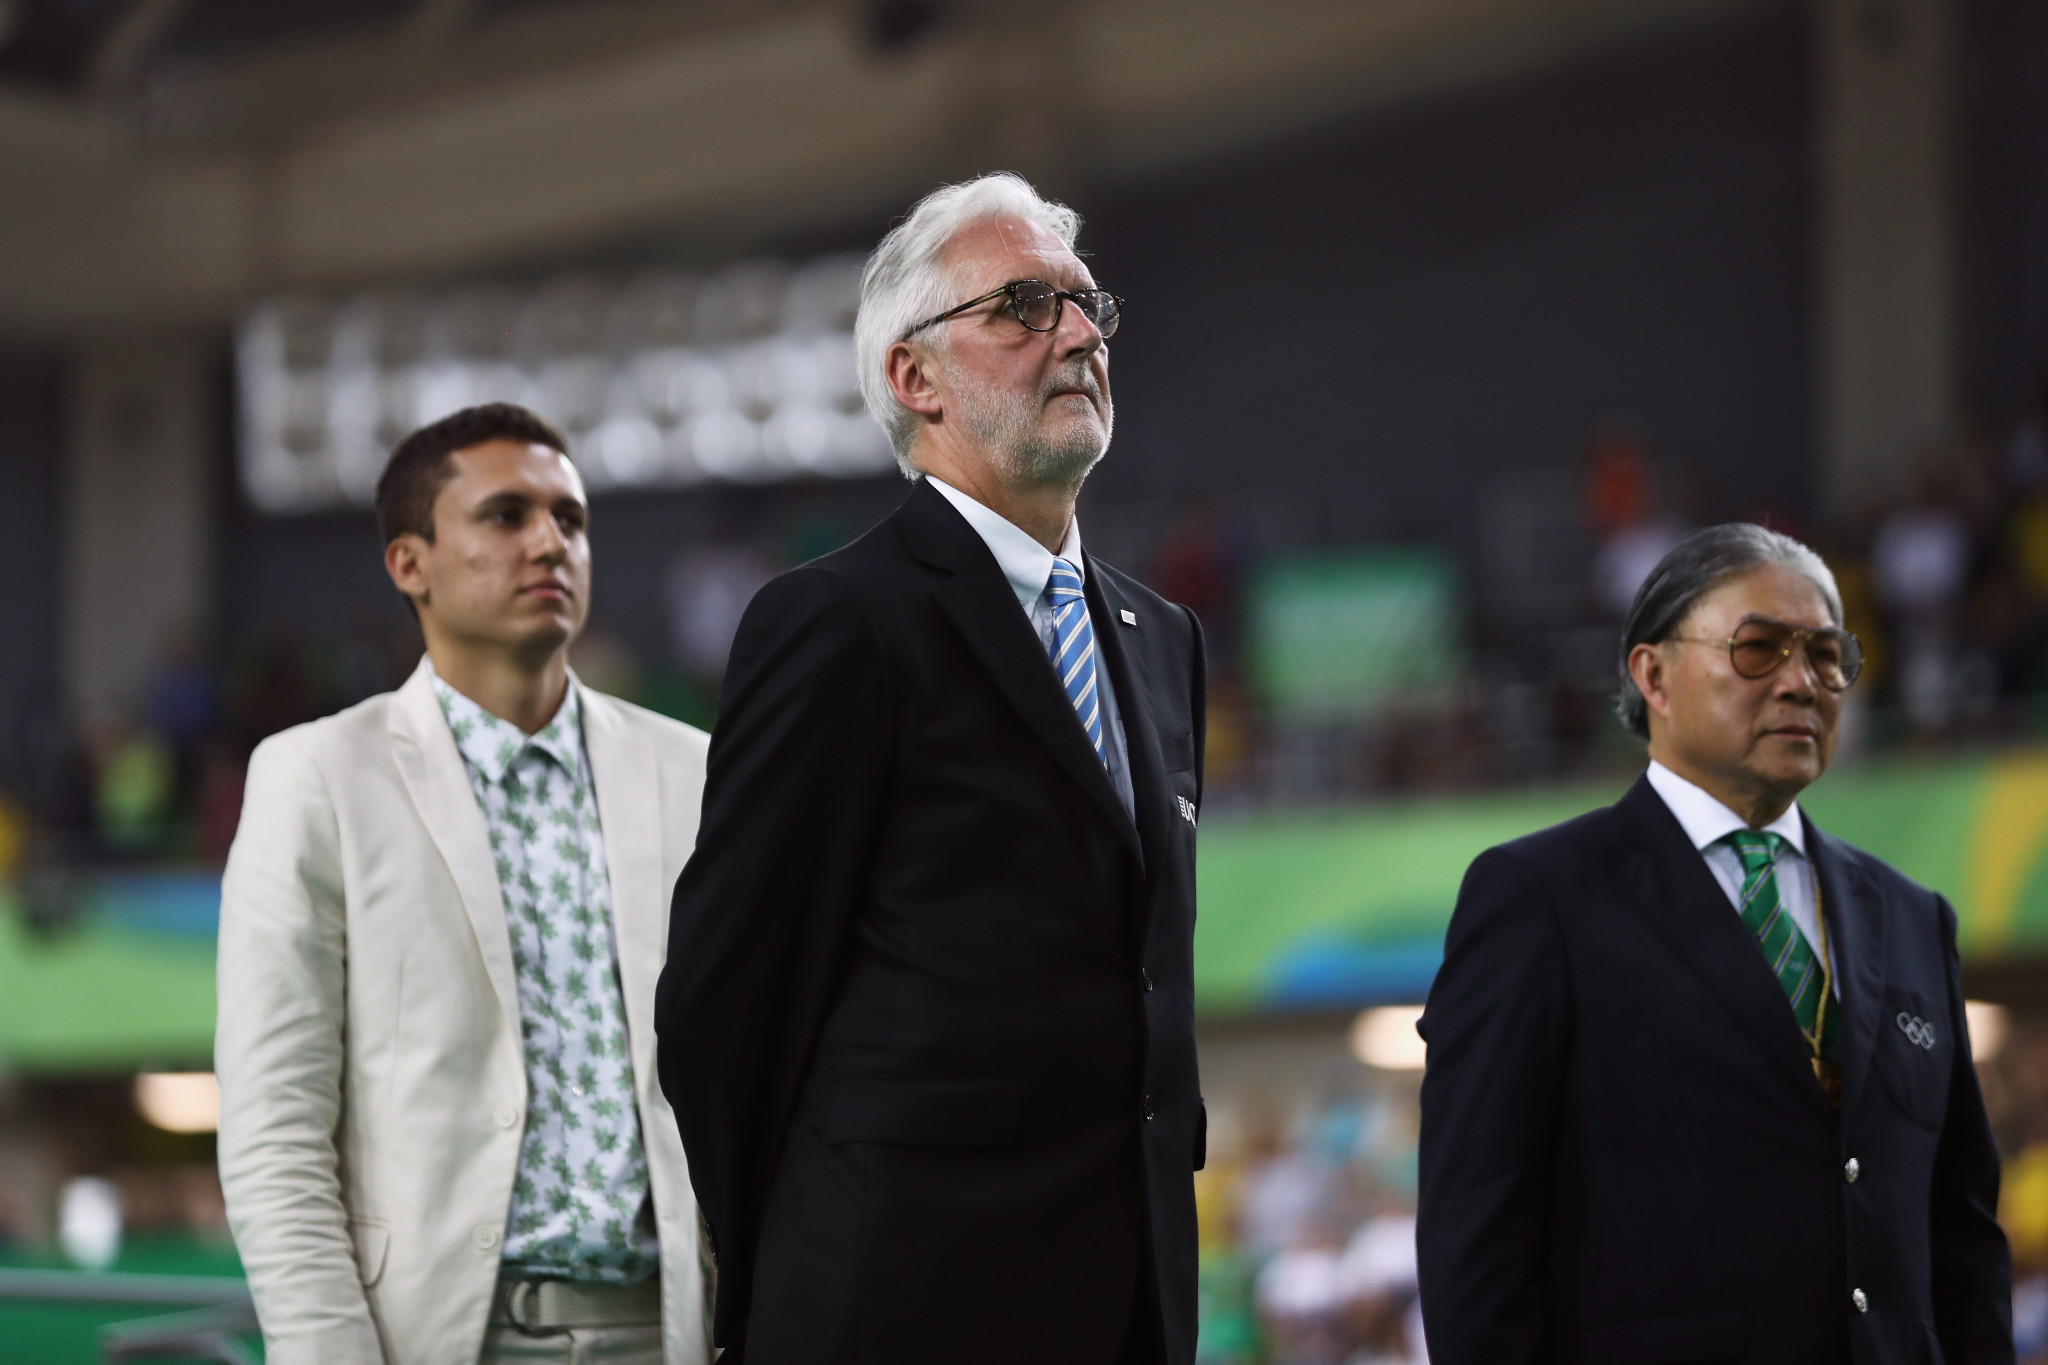 Brian Cookson, centre, is seeking to secure a second term as President ©Getty Images